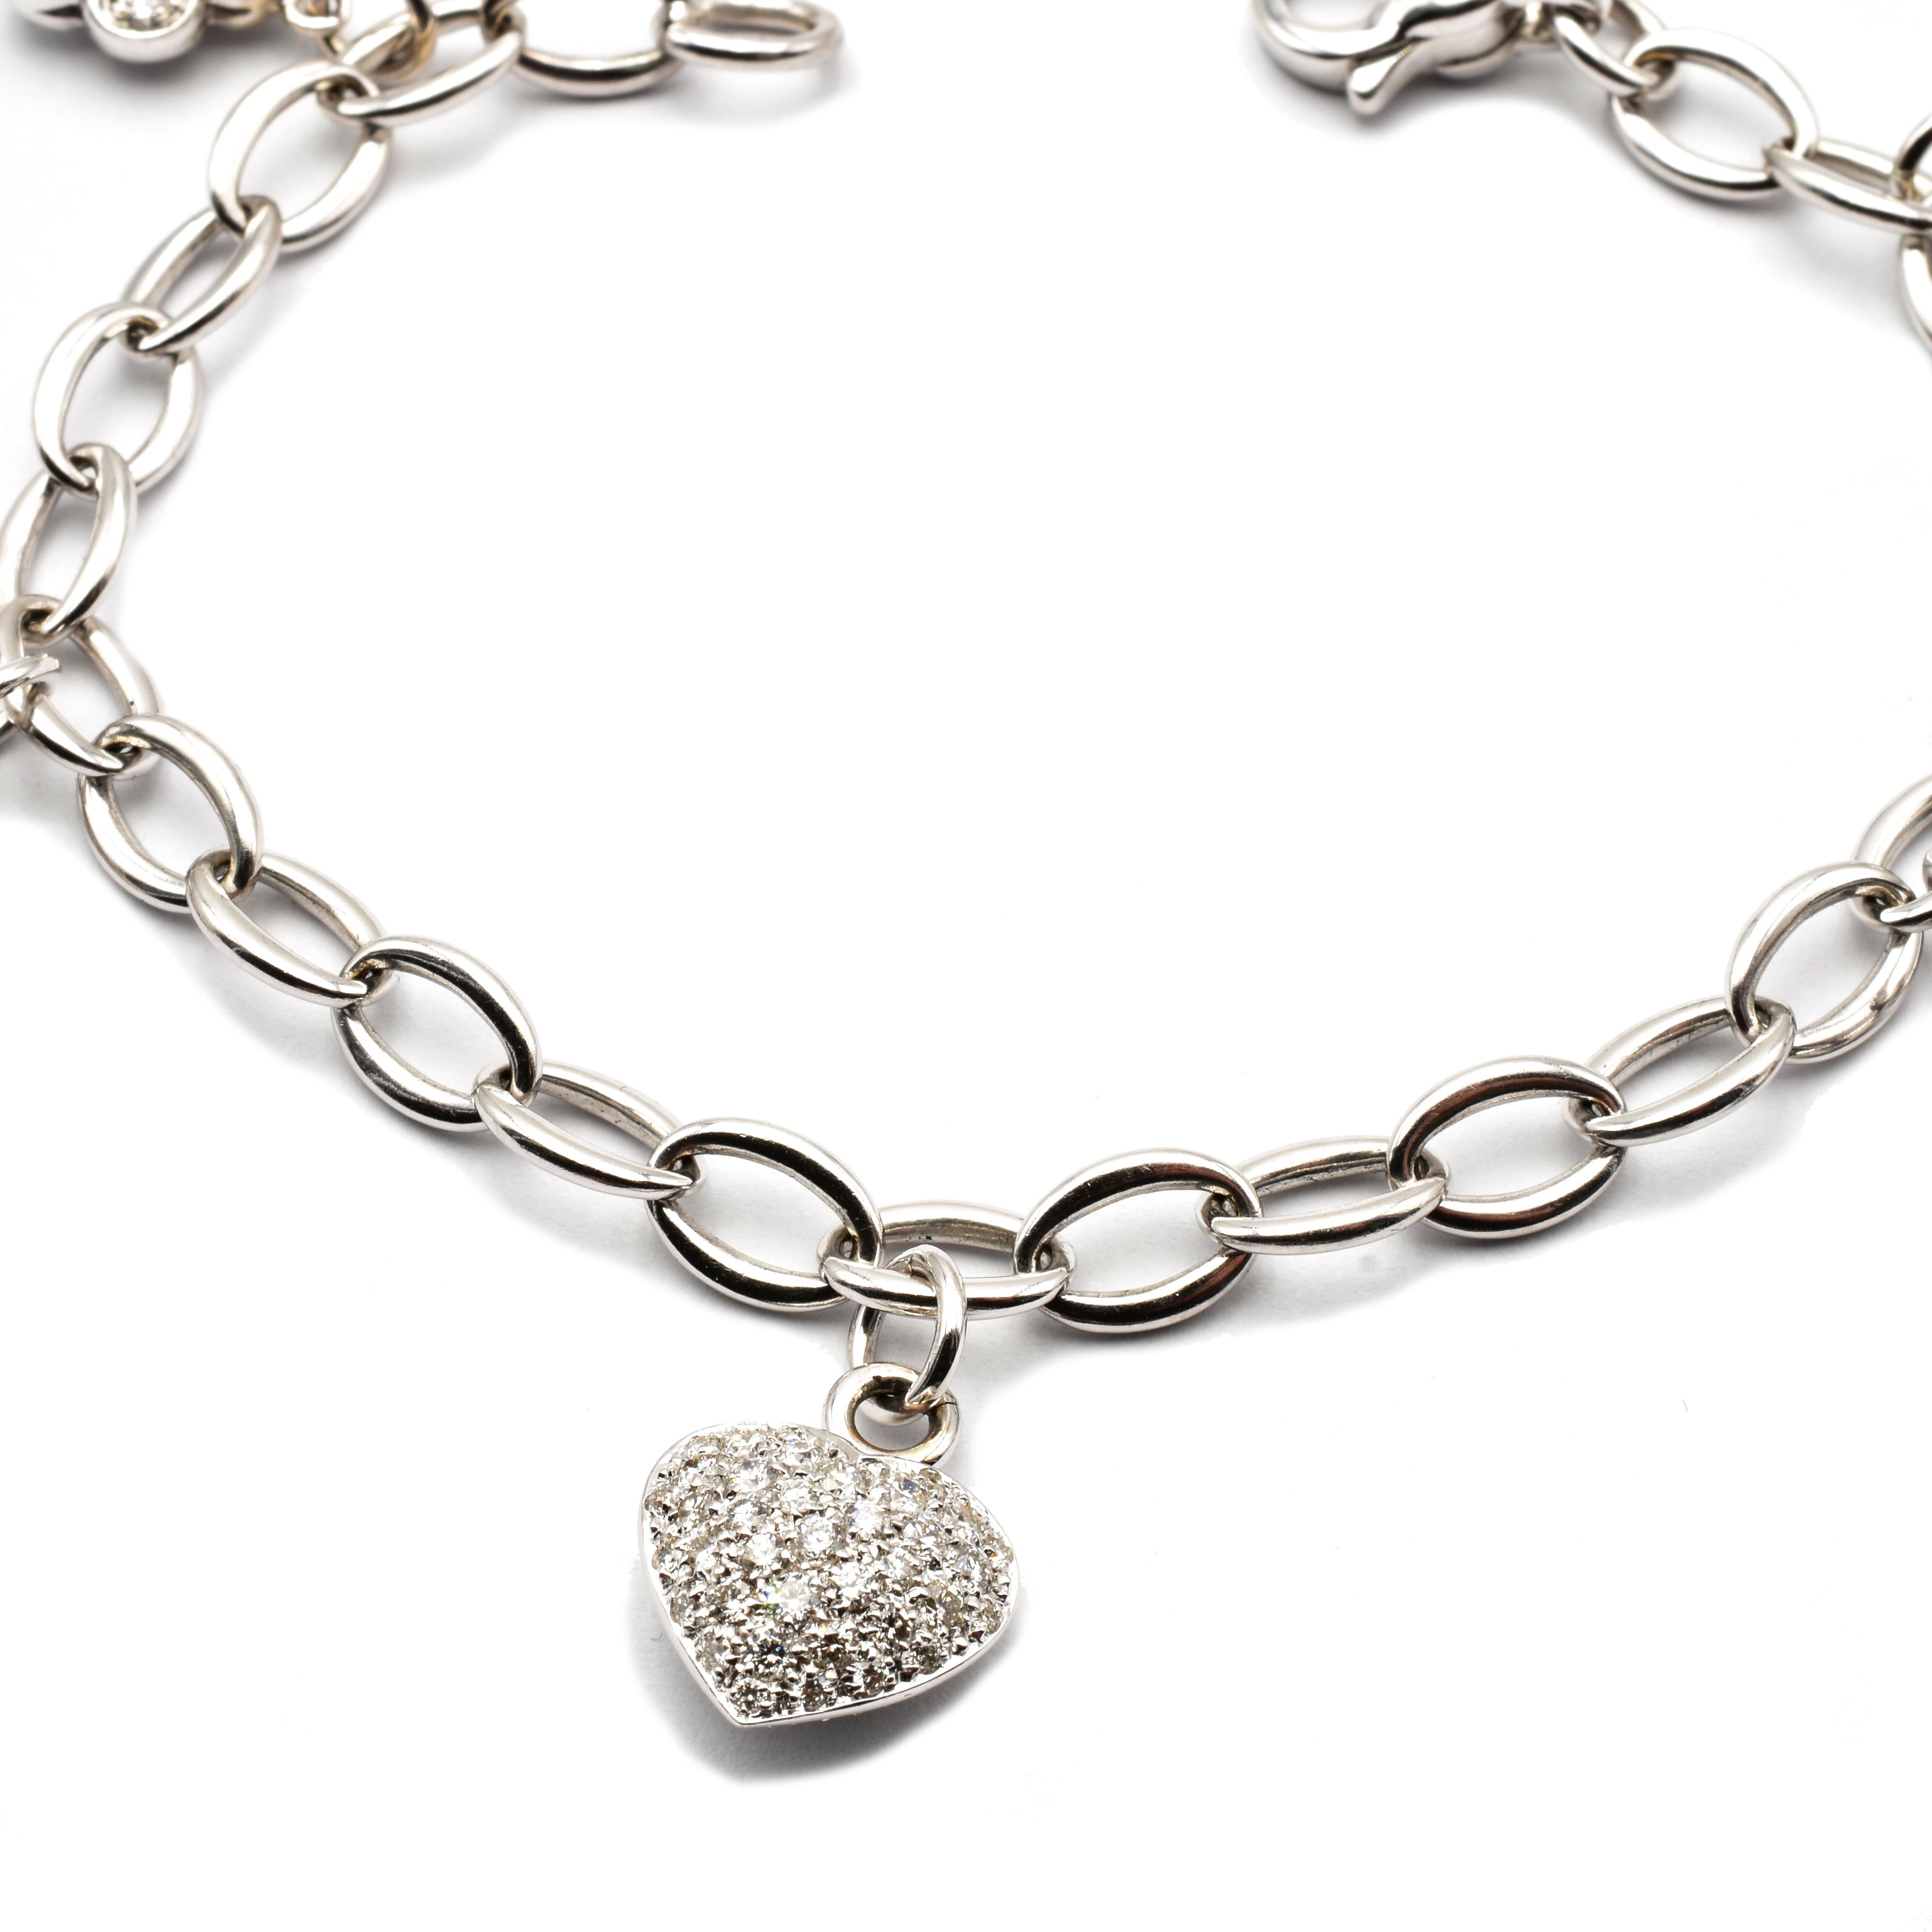 18 Kt White Gold Bracelet with Mixed Hanging Charms in White Diamonds. 
One Heart, One Star, One Half Moon and two Flowers.
Handmade in Italy in our Atelier in Valenza (AL).
18Kt Gold g 19.40
White Diamonds (G Color Vs Clarity) ct 2.63
All Charms